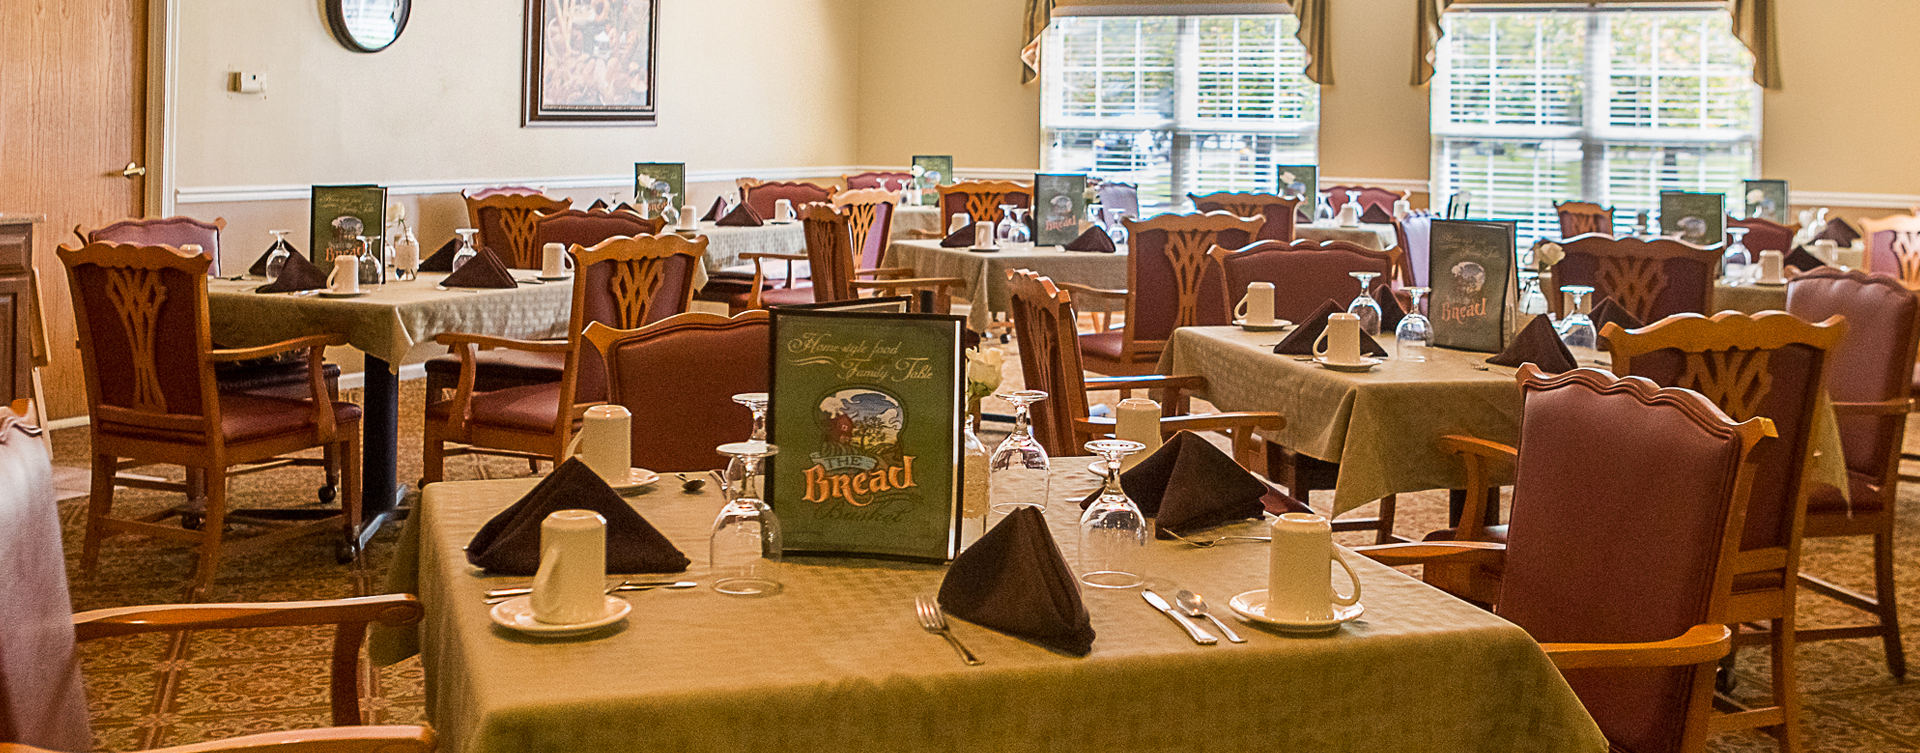 Food is best when shared with friends in the dining room at Bickford of Muscatine